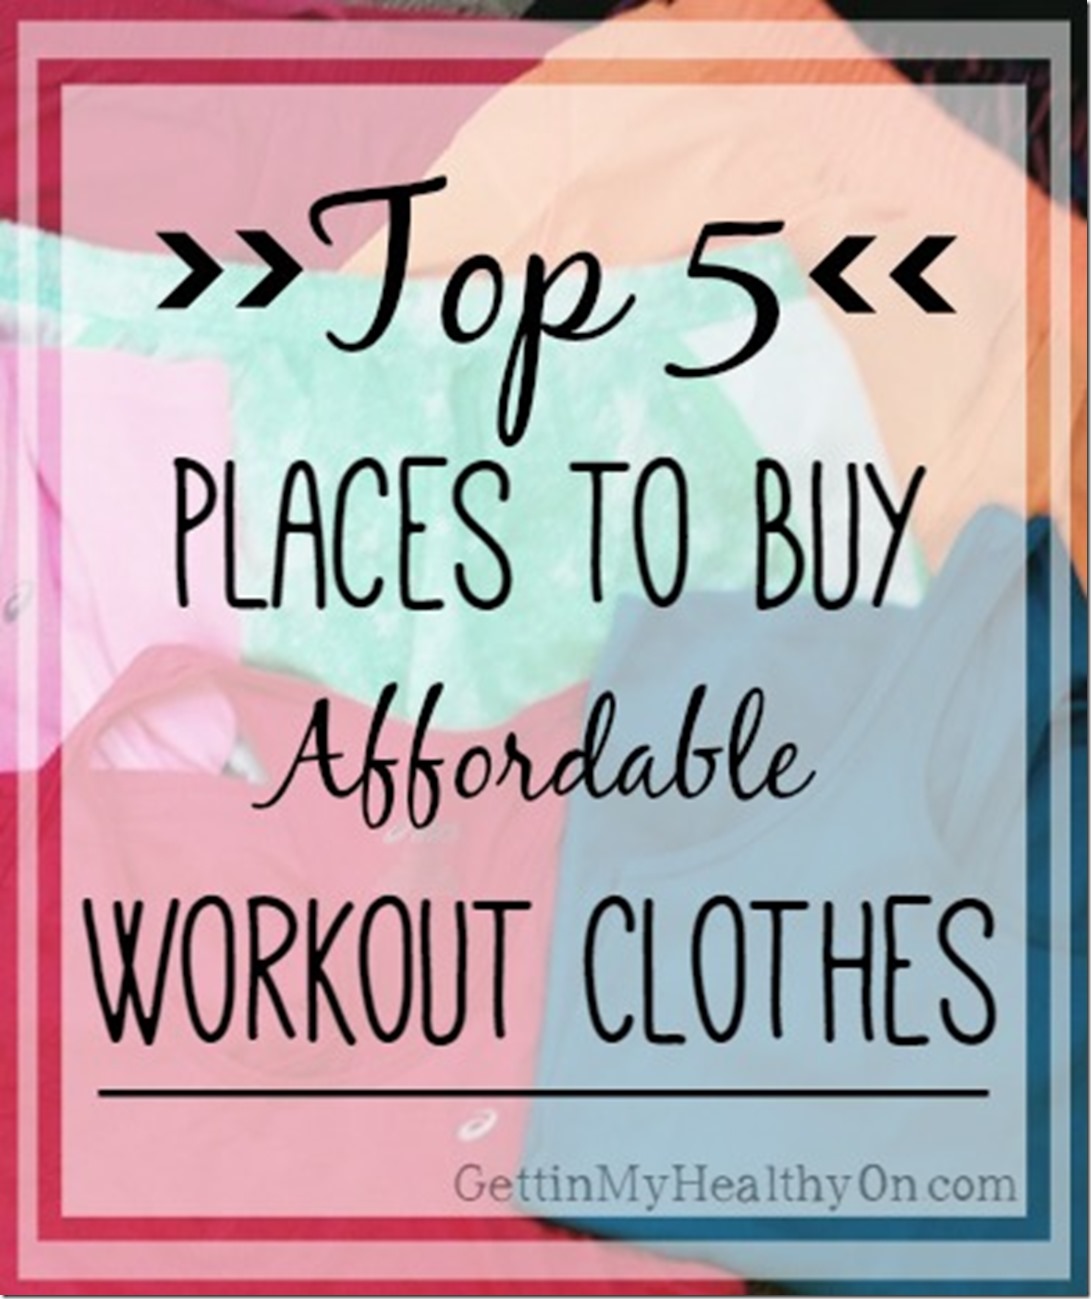 Top 5 Places to Buy Affordable Workout Clothes